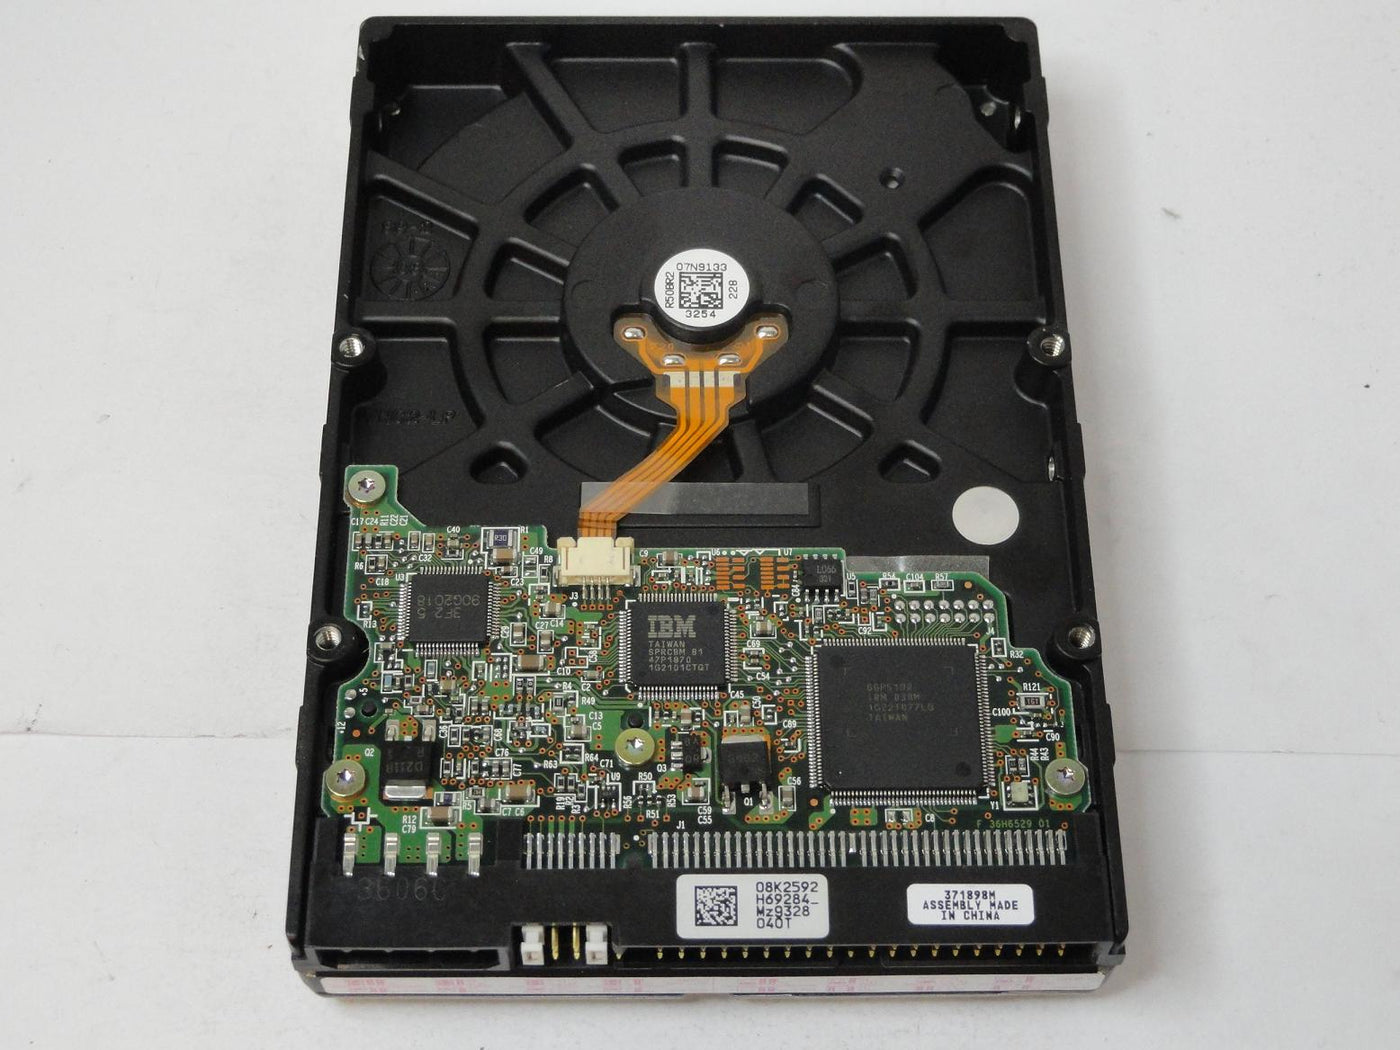 MC3405_J340_Excelstor 40GB IDE 7200rpm 3.5in HDD - Image2